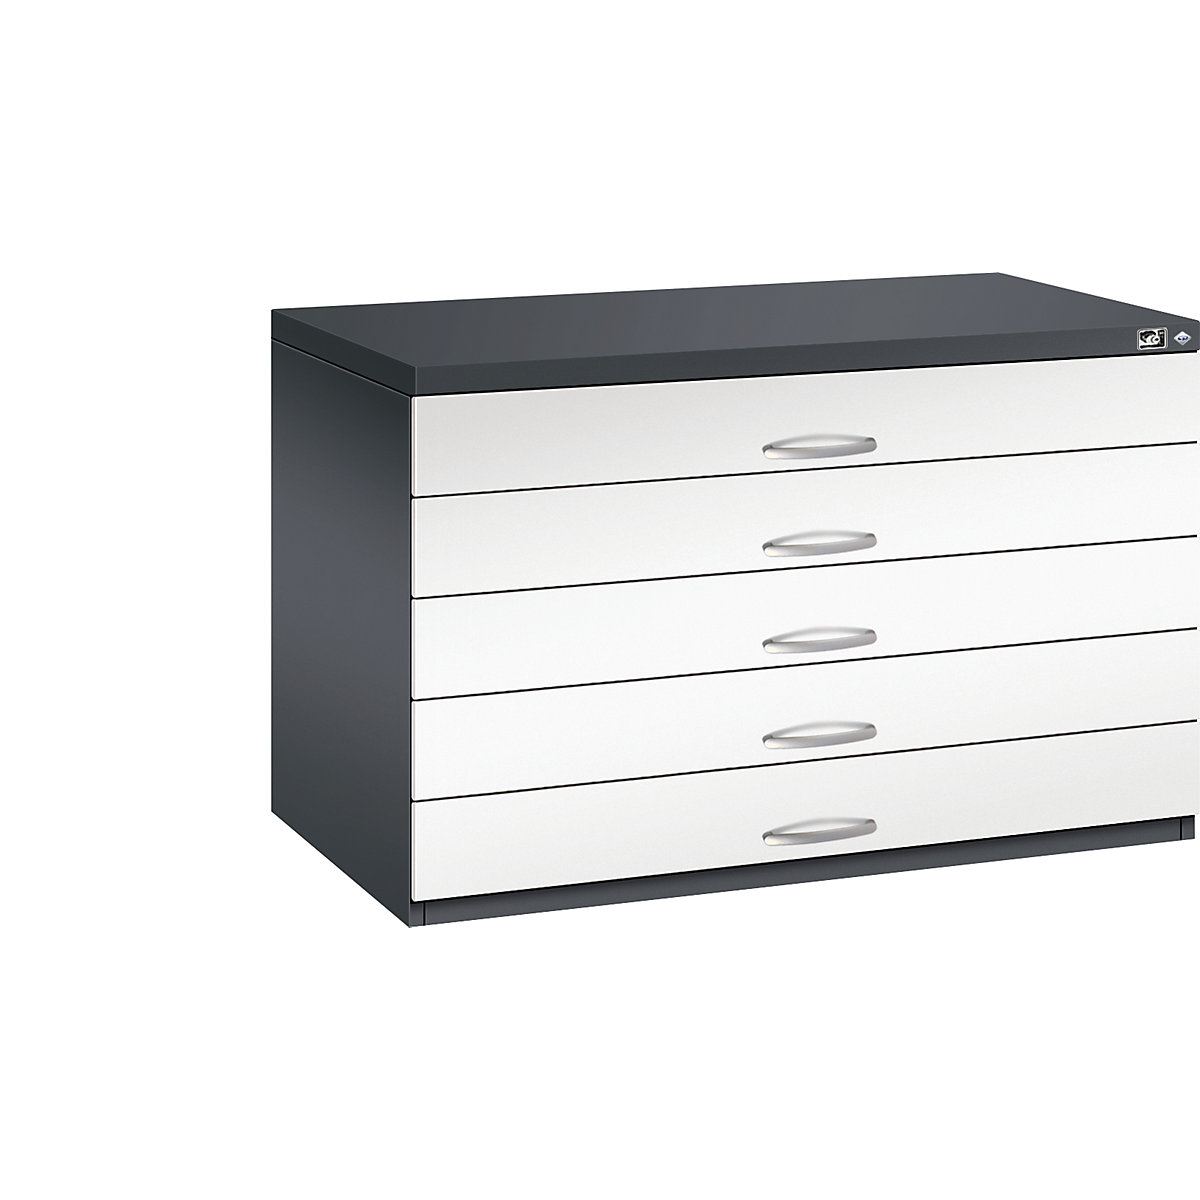 Drawing cabinet – C+P, A1, 5 drawers, height 760 mm, black grey / traffic white-20